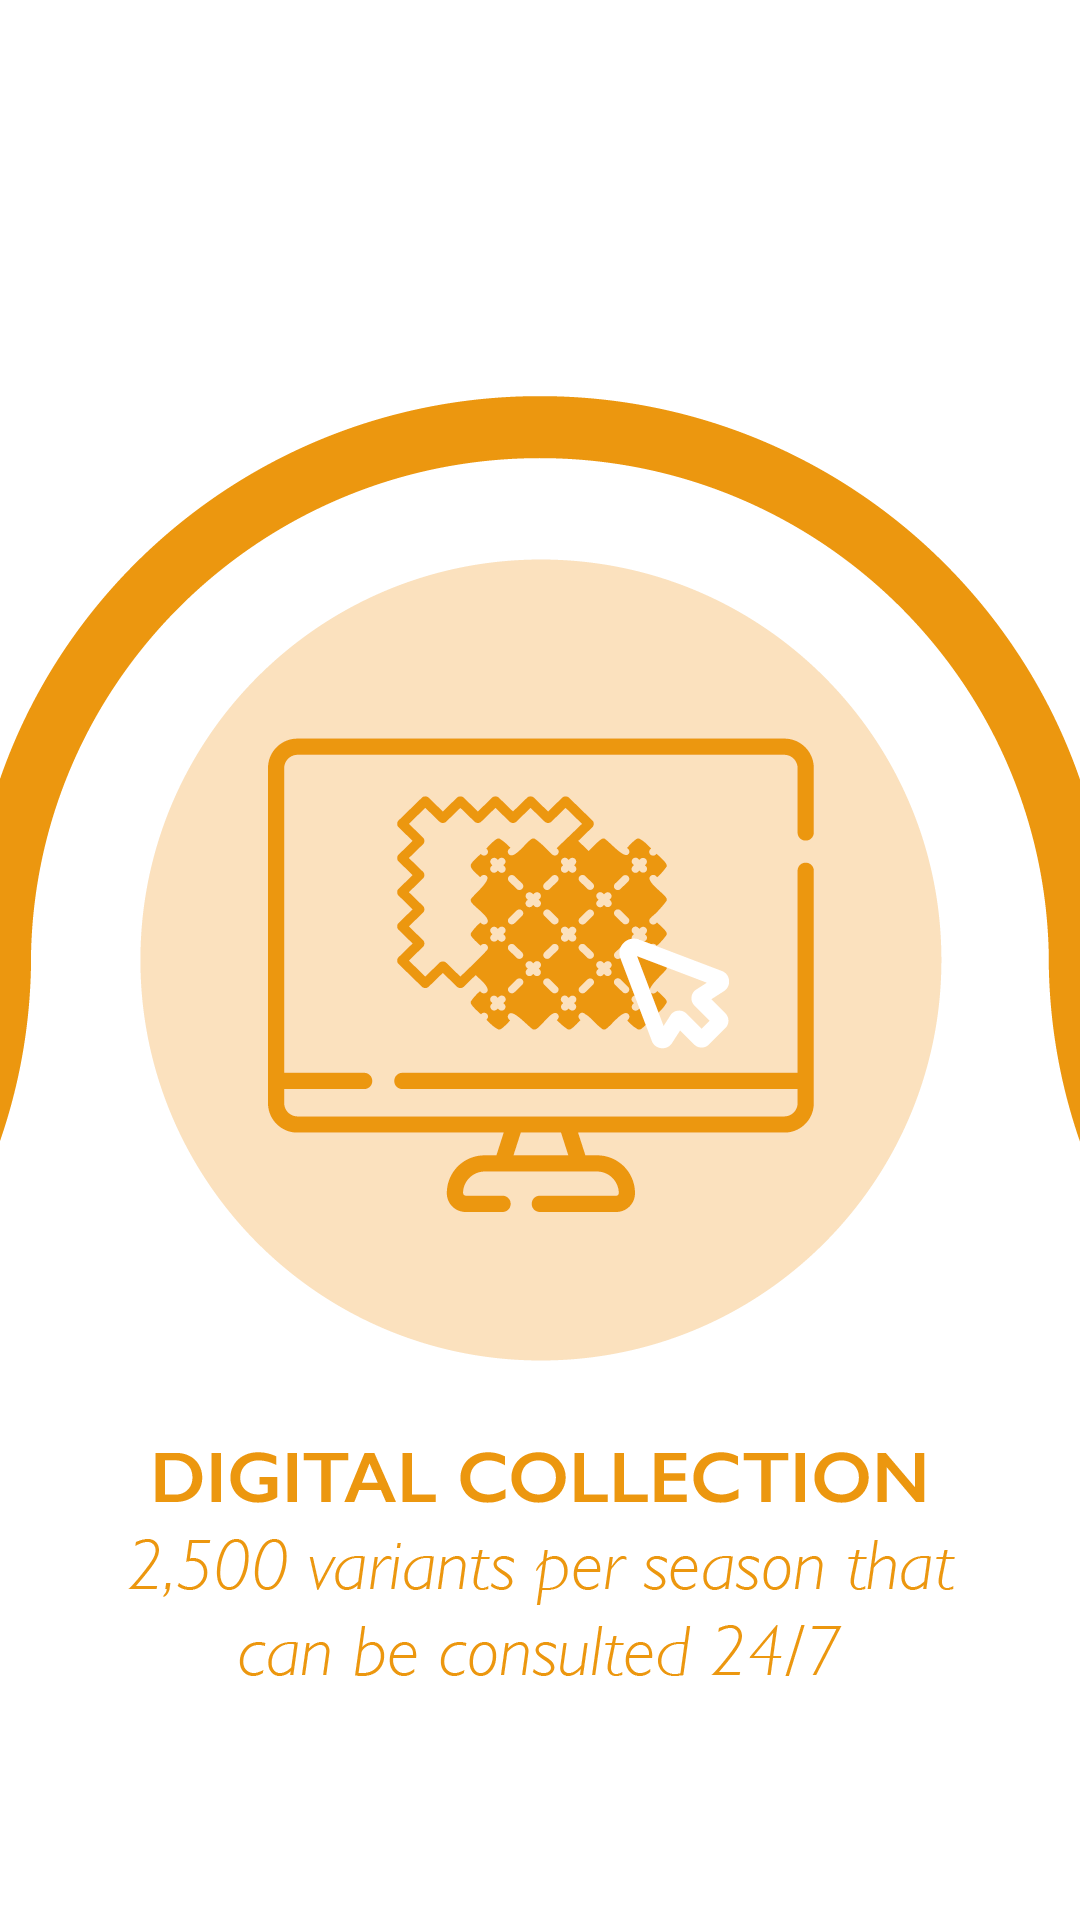 DIGITAL COLLECTION - 2,500 variants per season that can be consulted 24/7